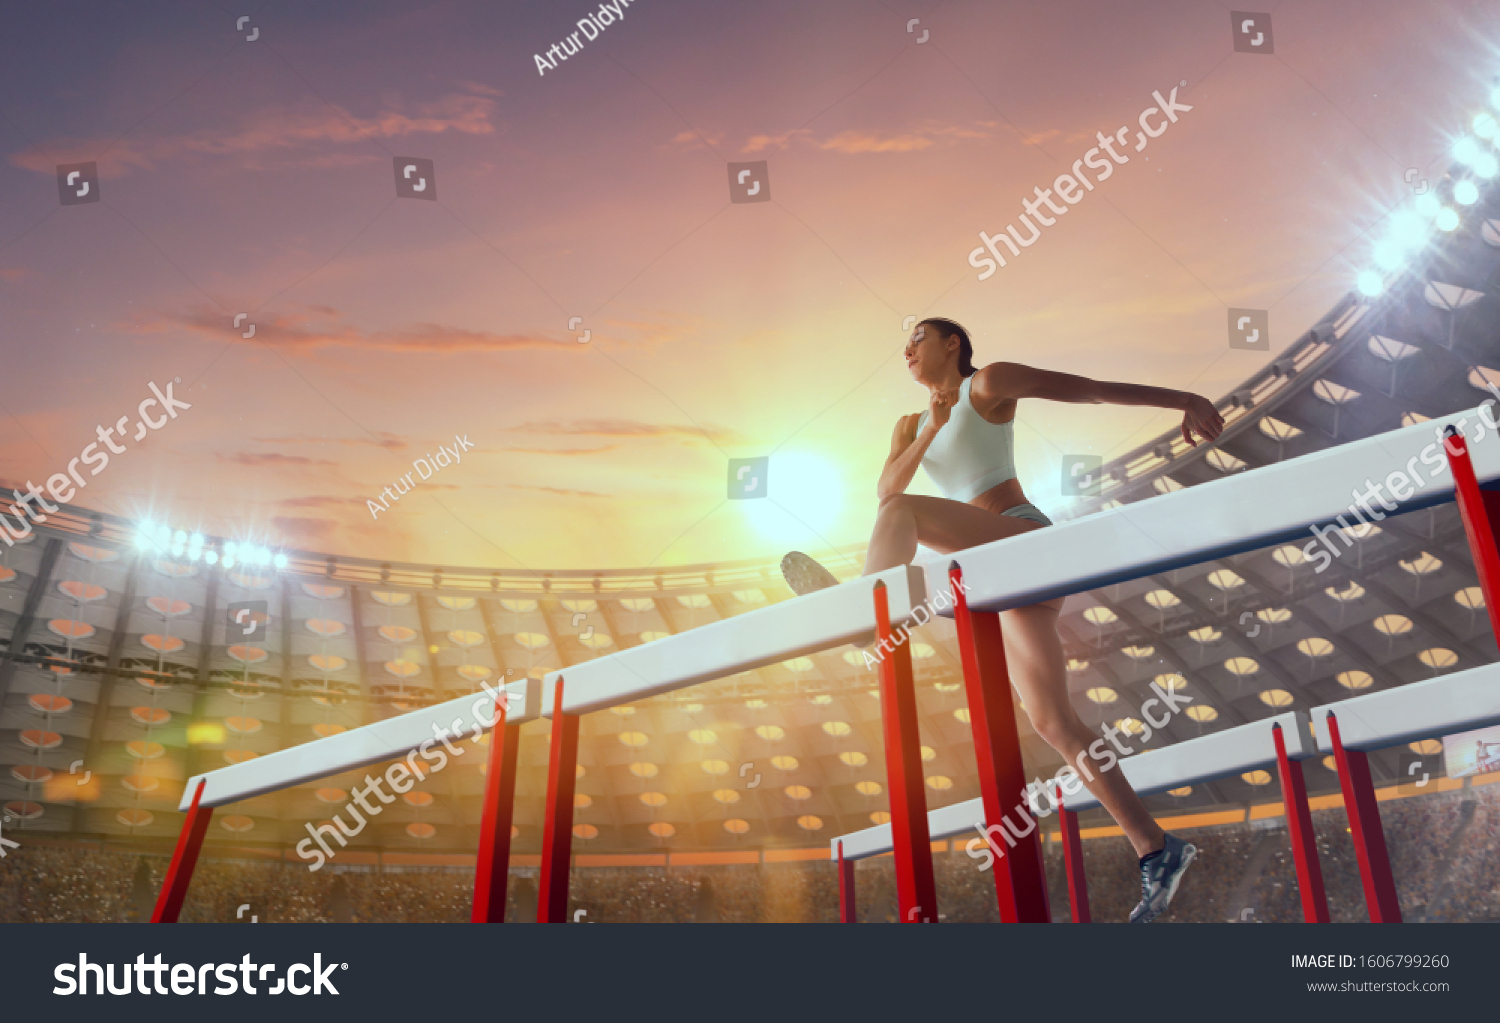 Athlete woman athlete jumps over the barrier at the running track in professional athletics stadium. #1606799260